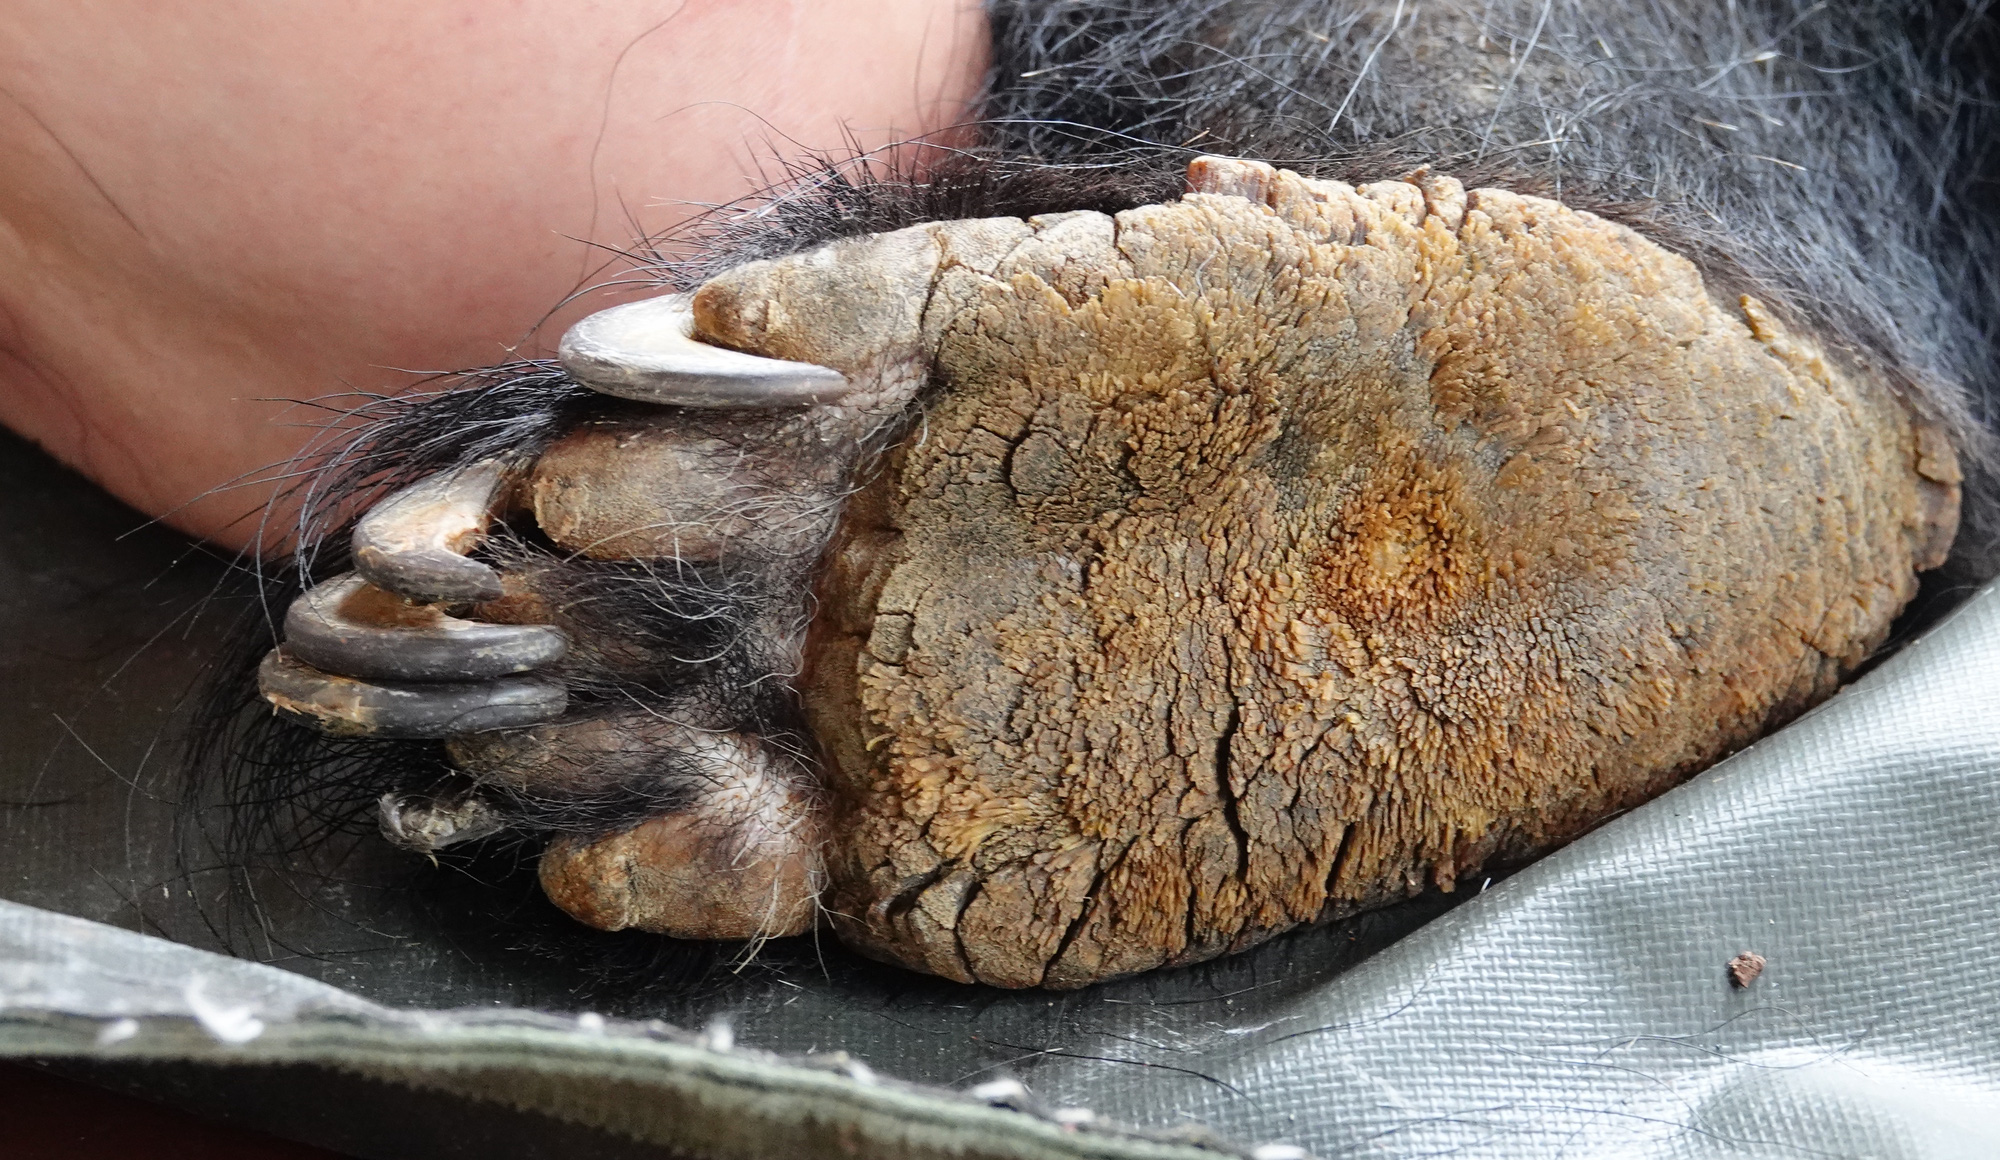 The bear’s paws display calluses, cracks, and the nails have grown too long and have turned inwards. Photo: Animals Asia Foundation